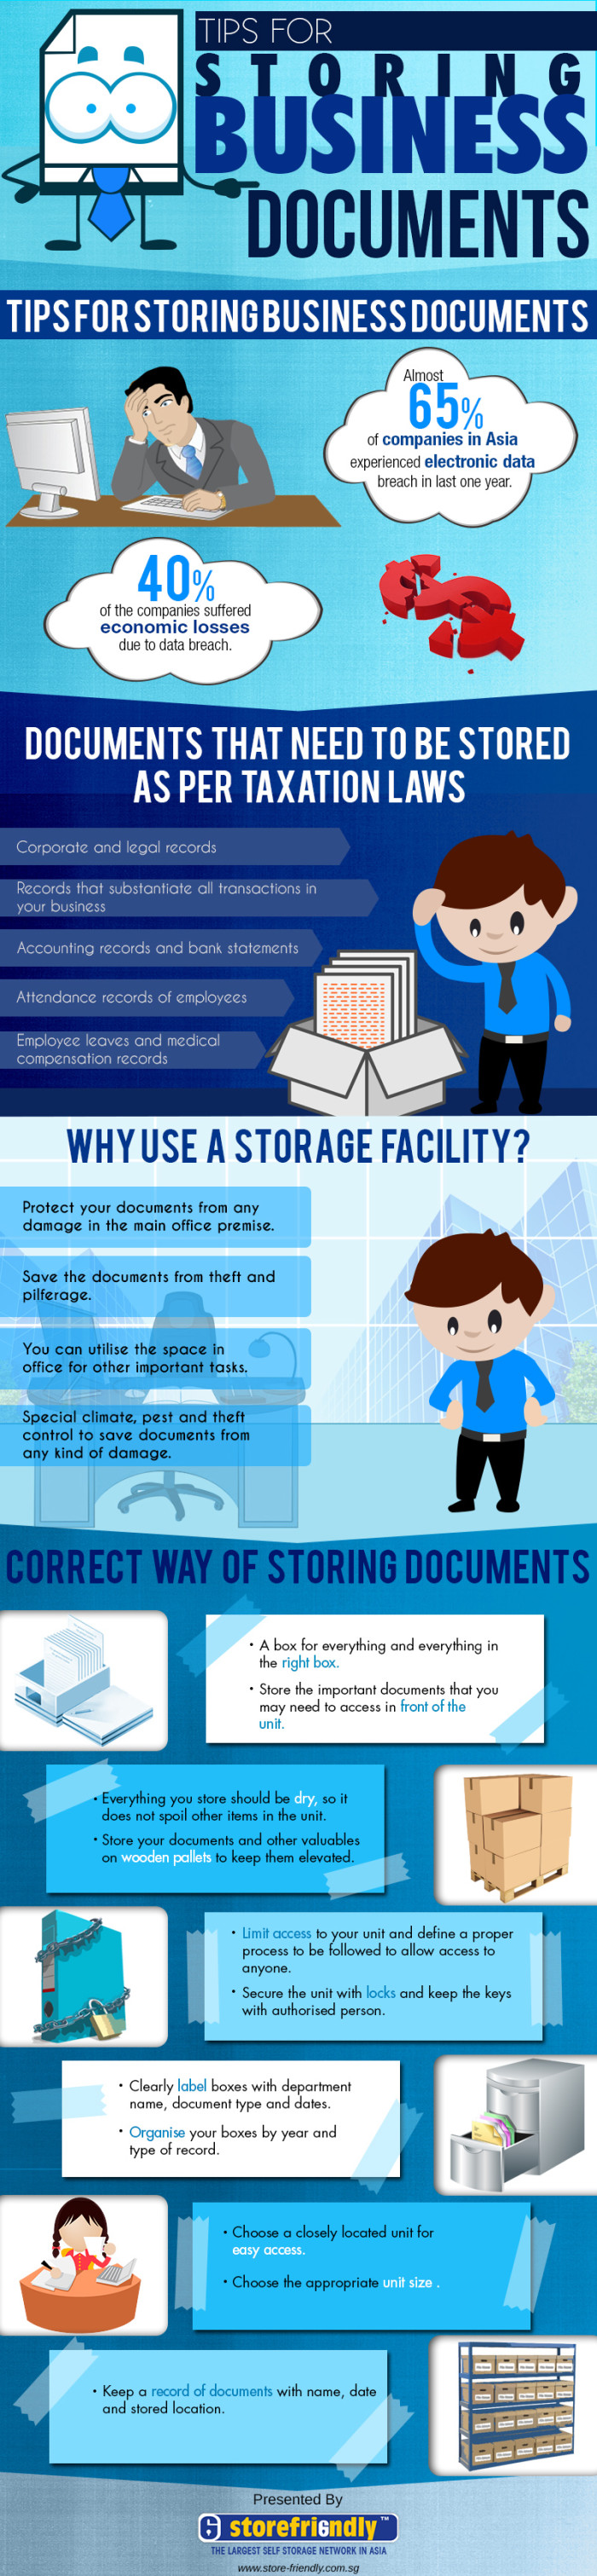 Tips For Storing Business Documents